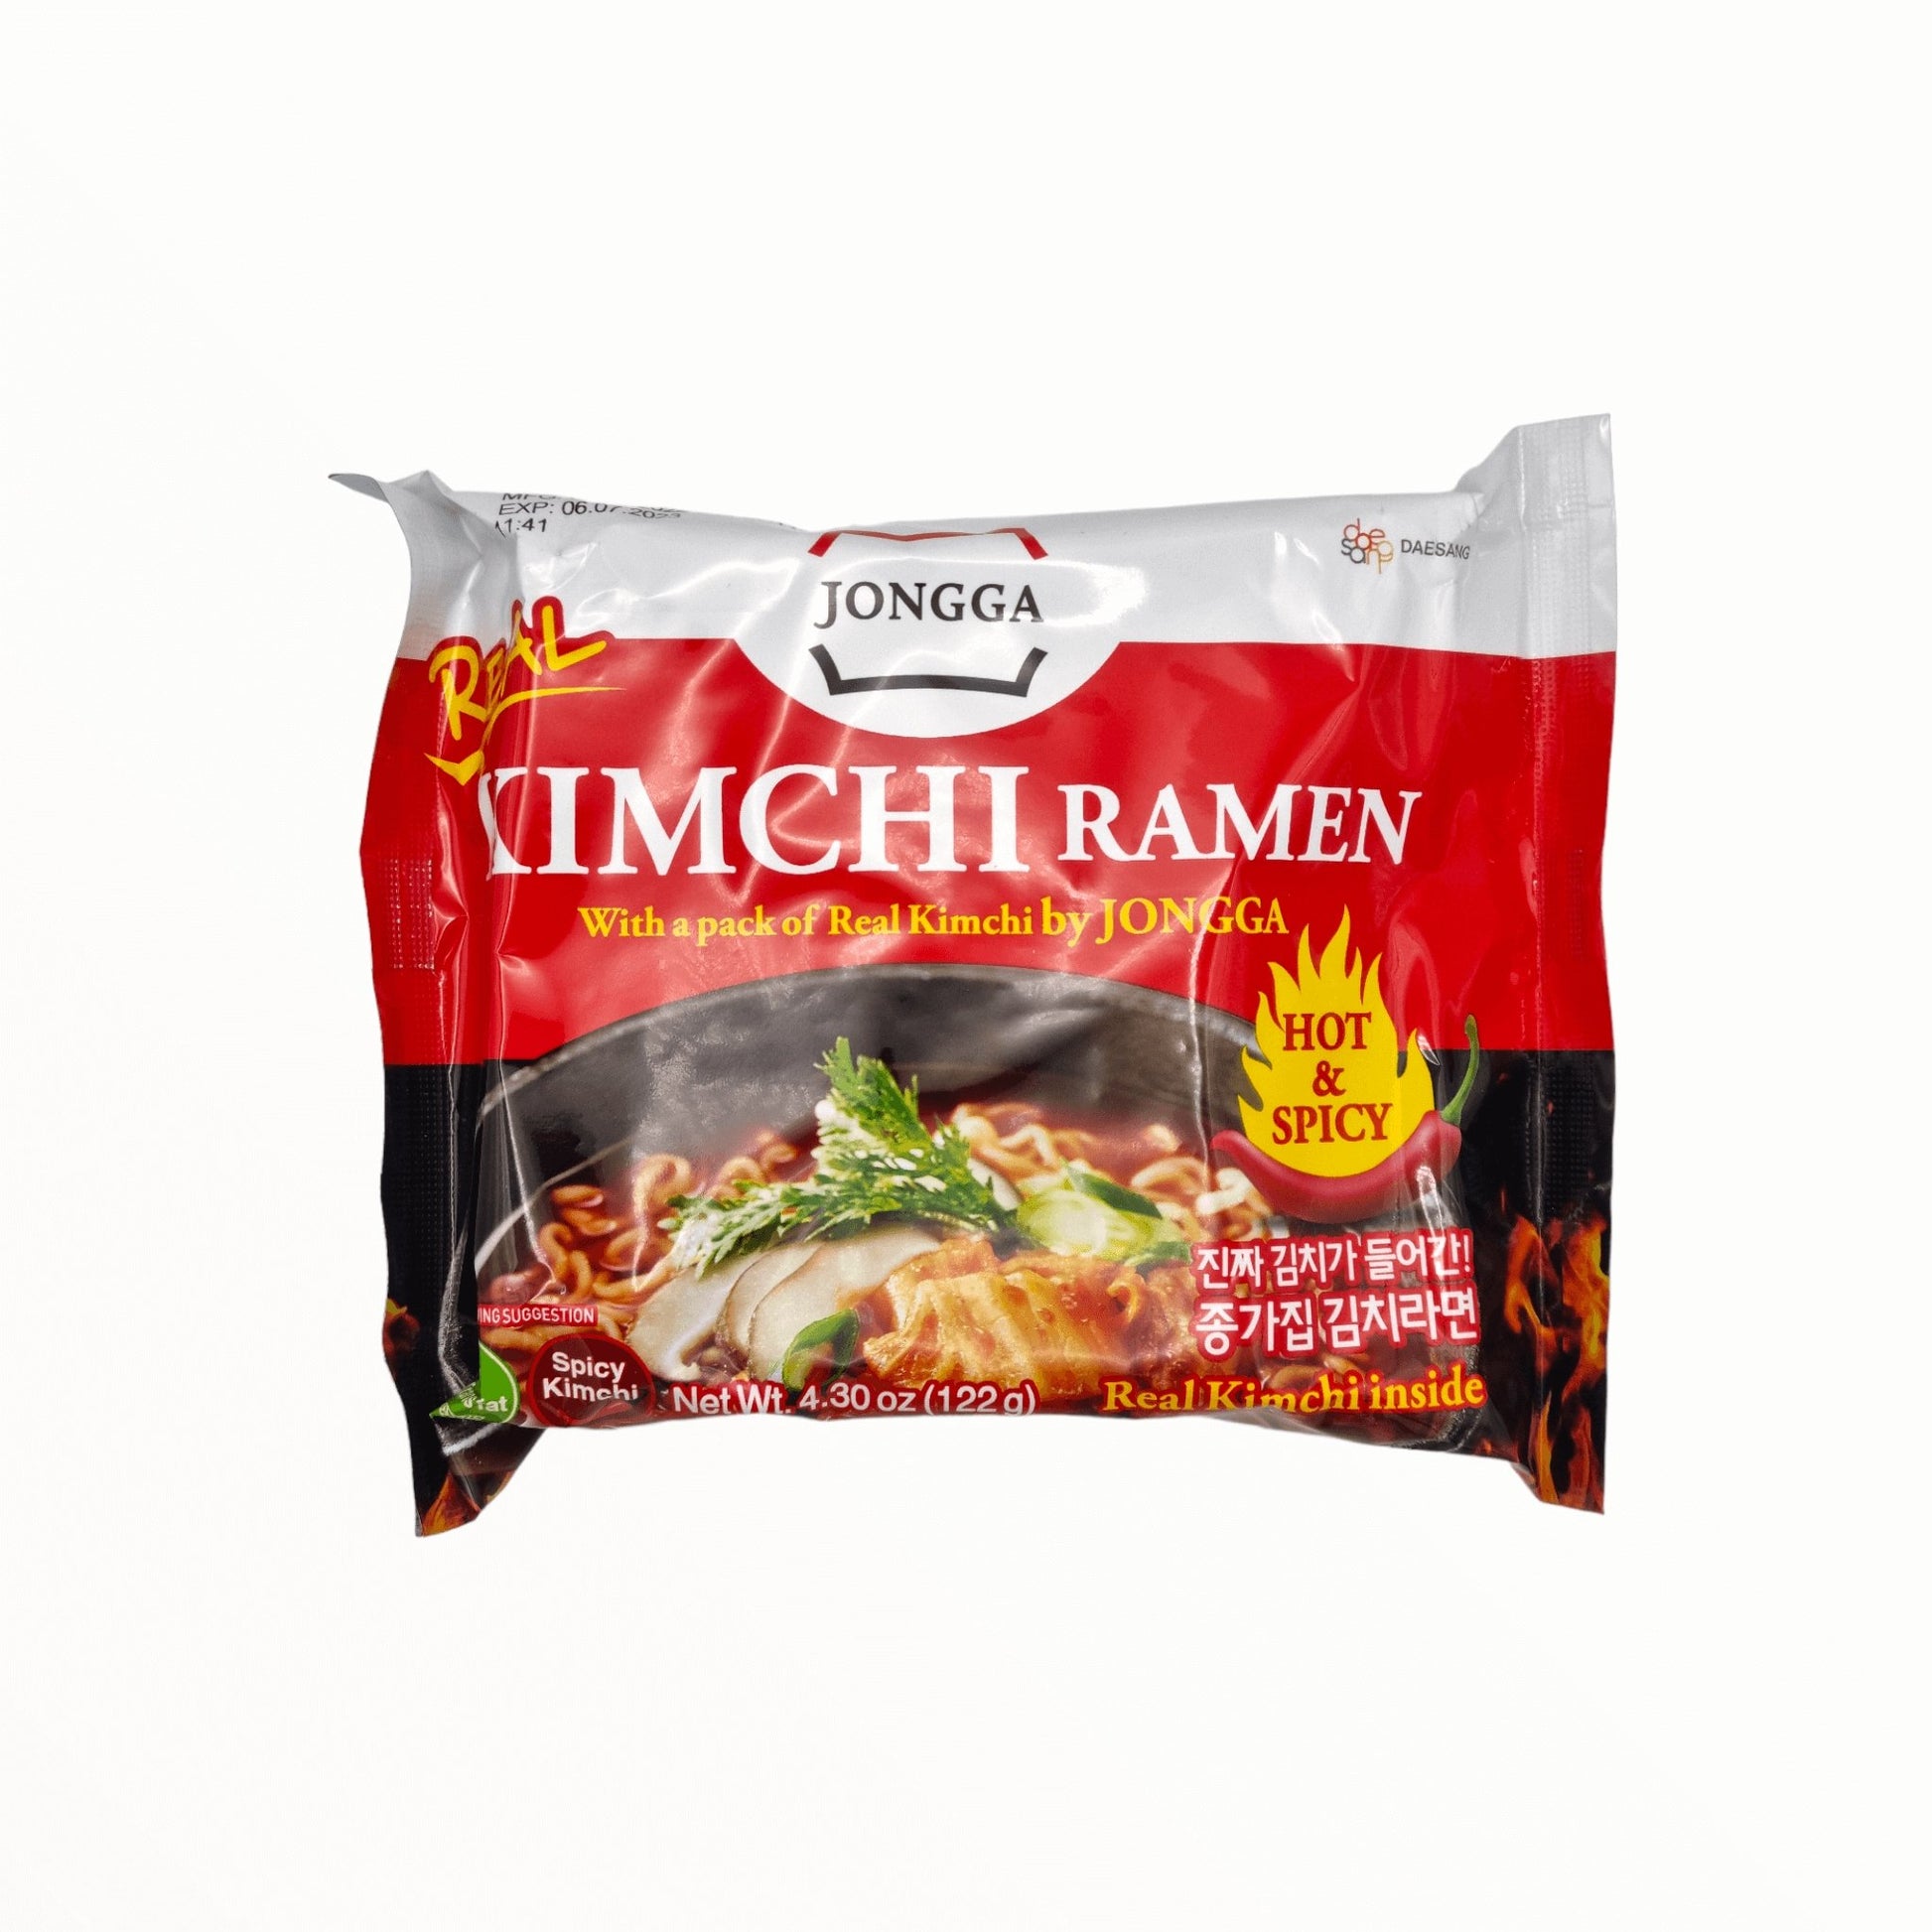 Instant Nudeln Kimchi Ramen Hot & Spicy 122g - Mabuhay Pinoy Asia Shop